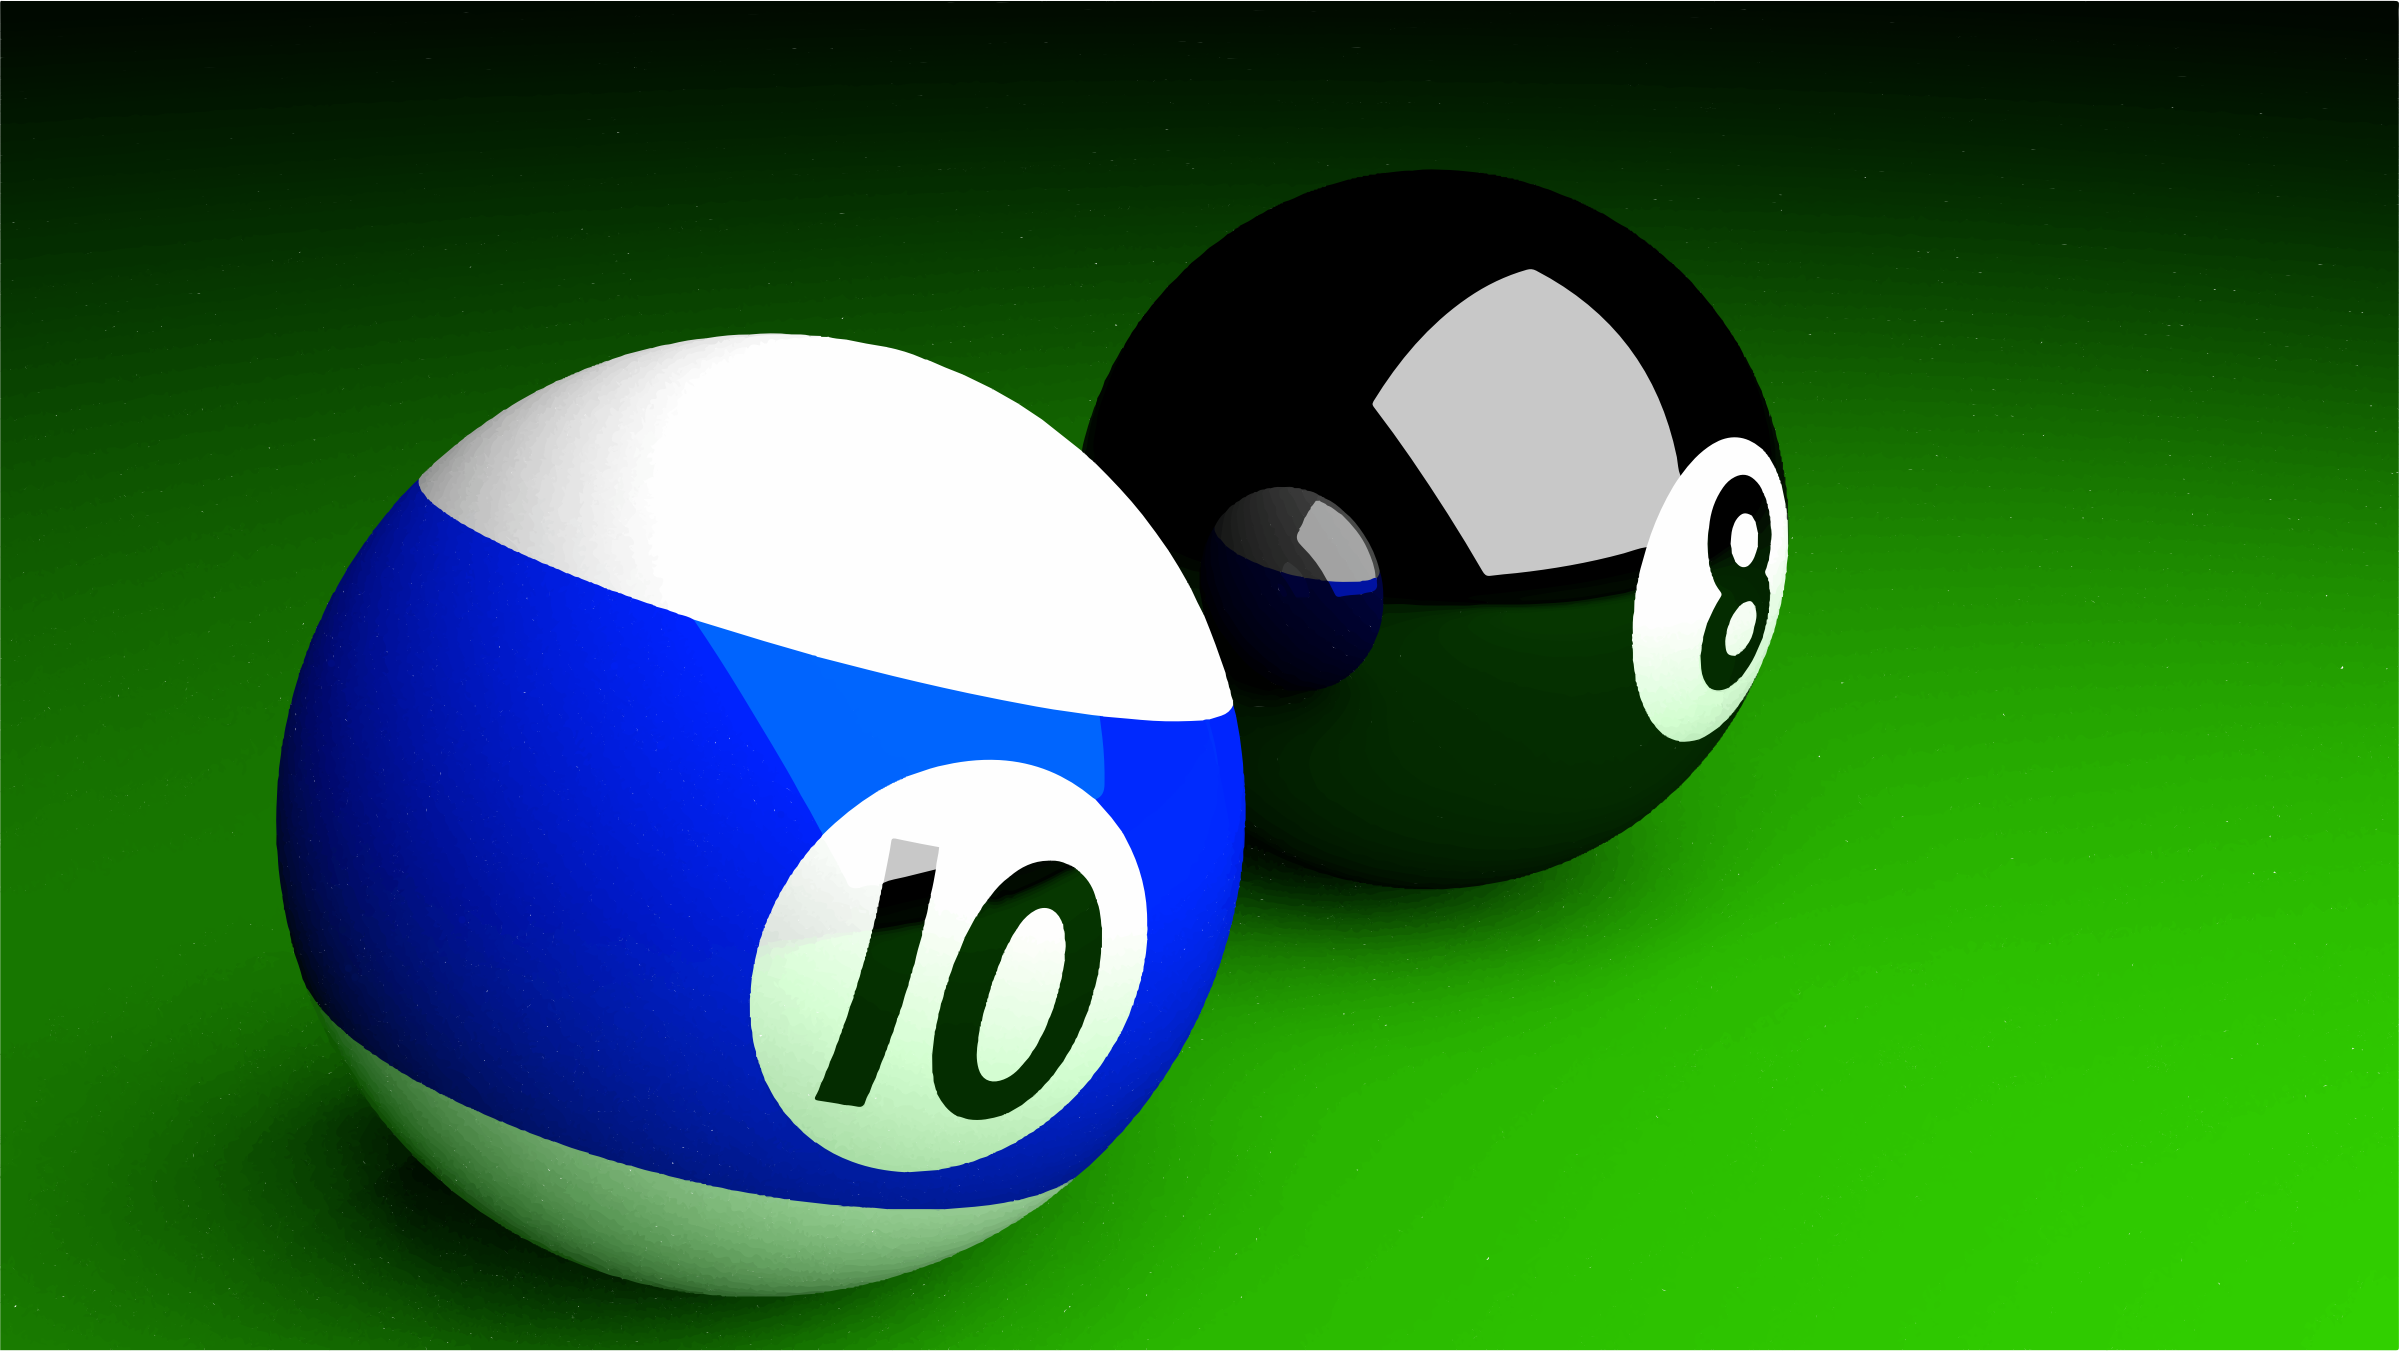 https://openclipart.org/image/2400px/svg_to_png/221587/Billiards.png